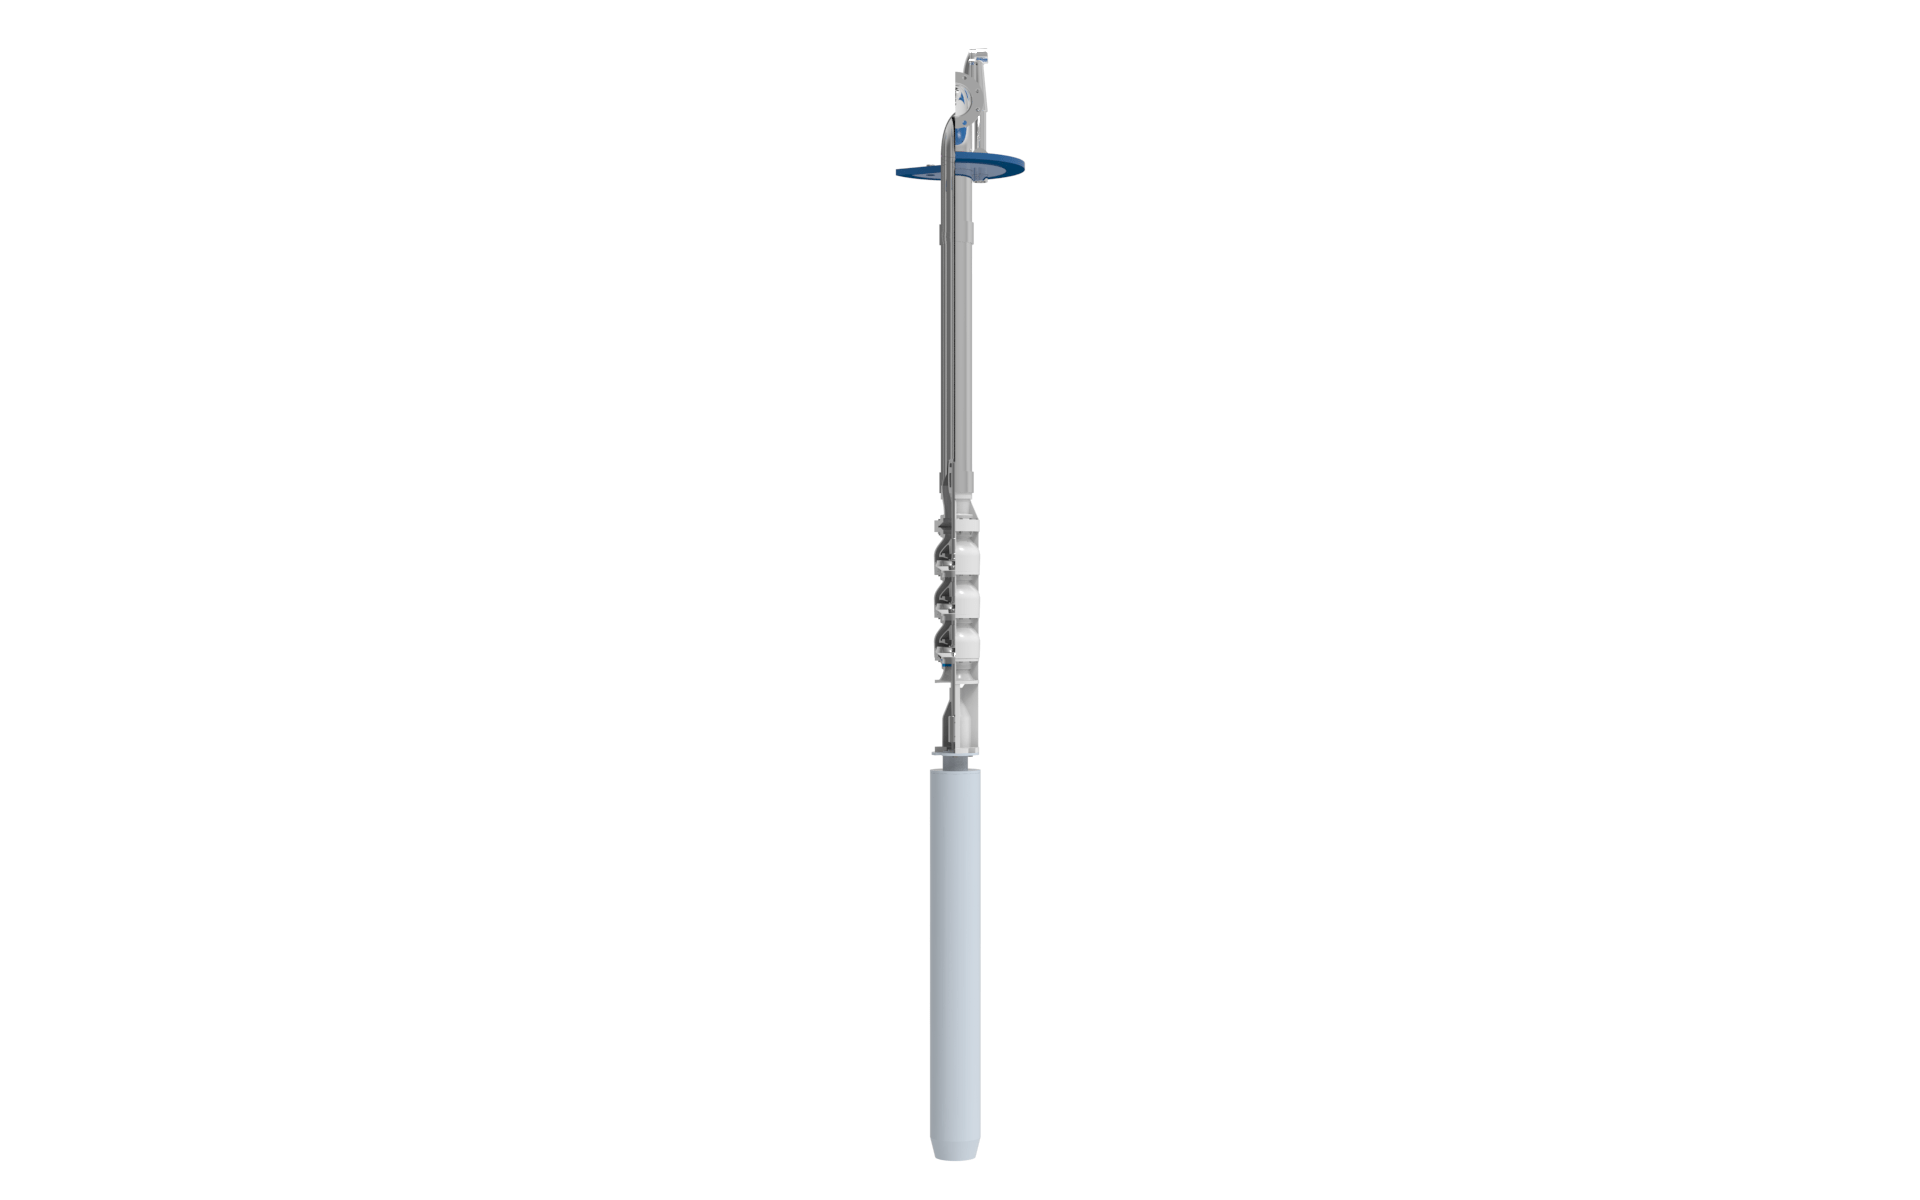 FLOWAY® VSB VERTICAL TURBINE SUBMERSIBLE PUMP right side view